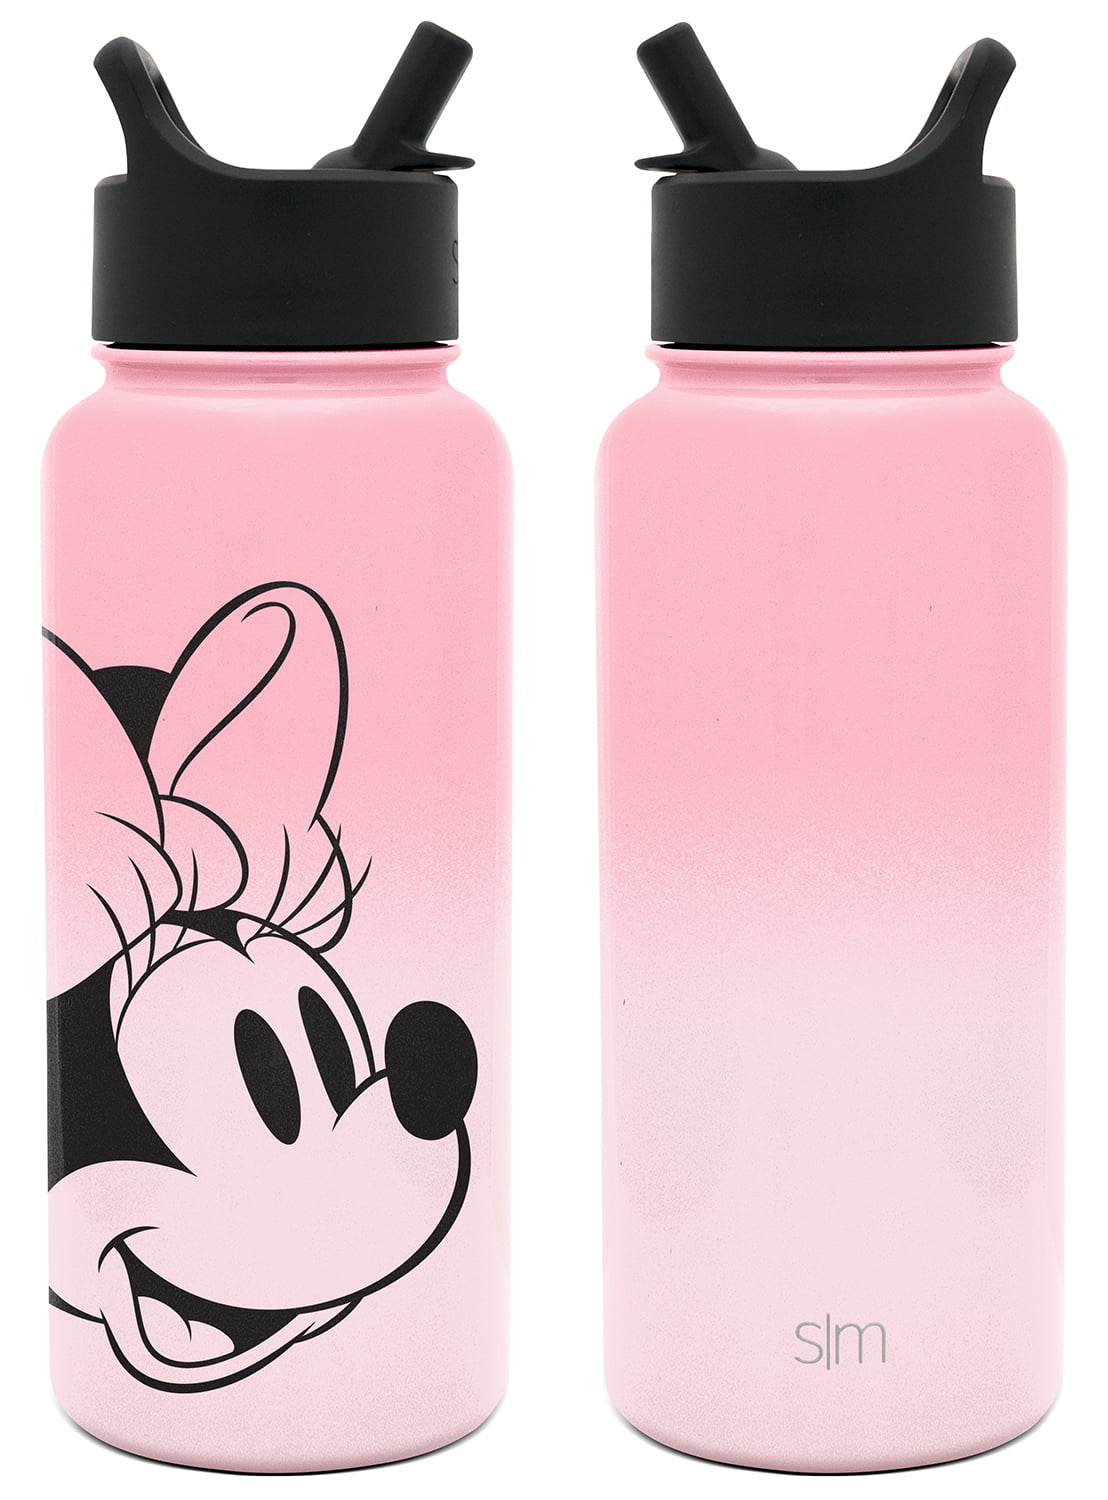 Disney Store Japan Minnie Mouse Water Bottle with Carabiner Strap 20.28 oz